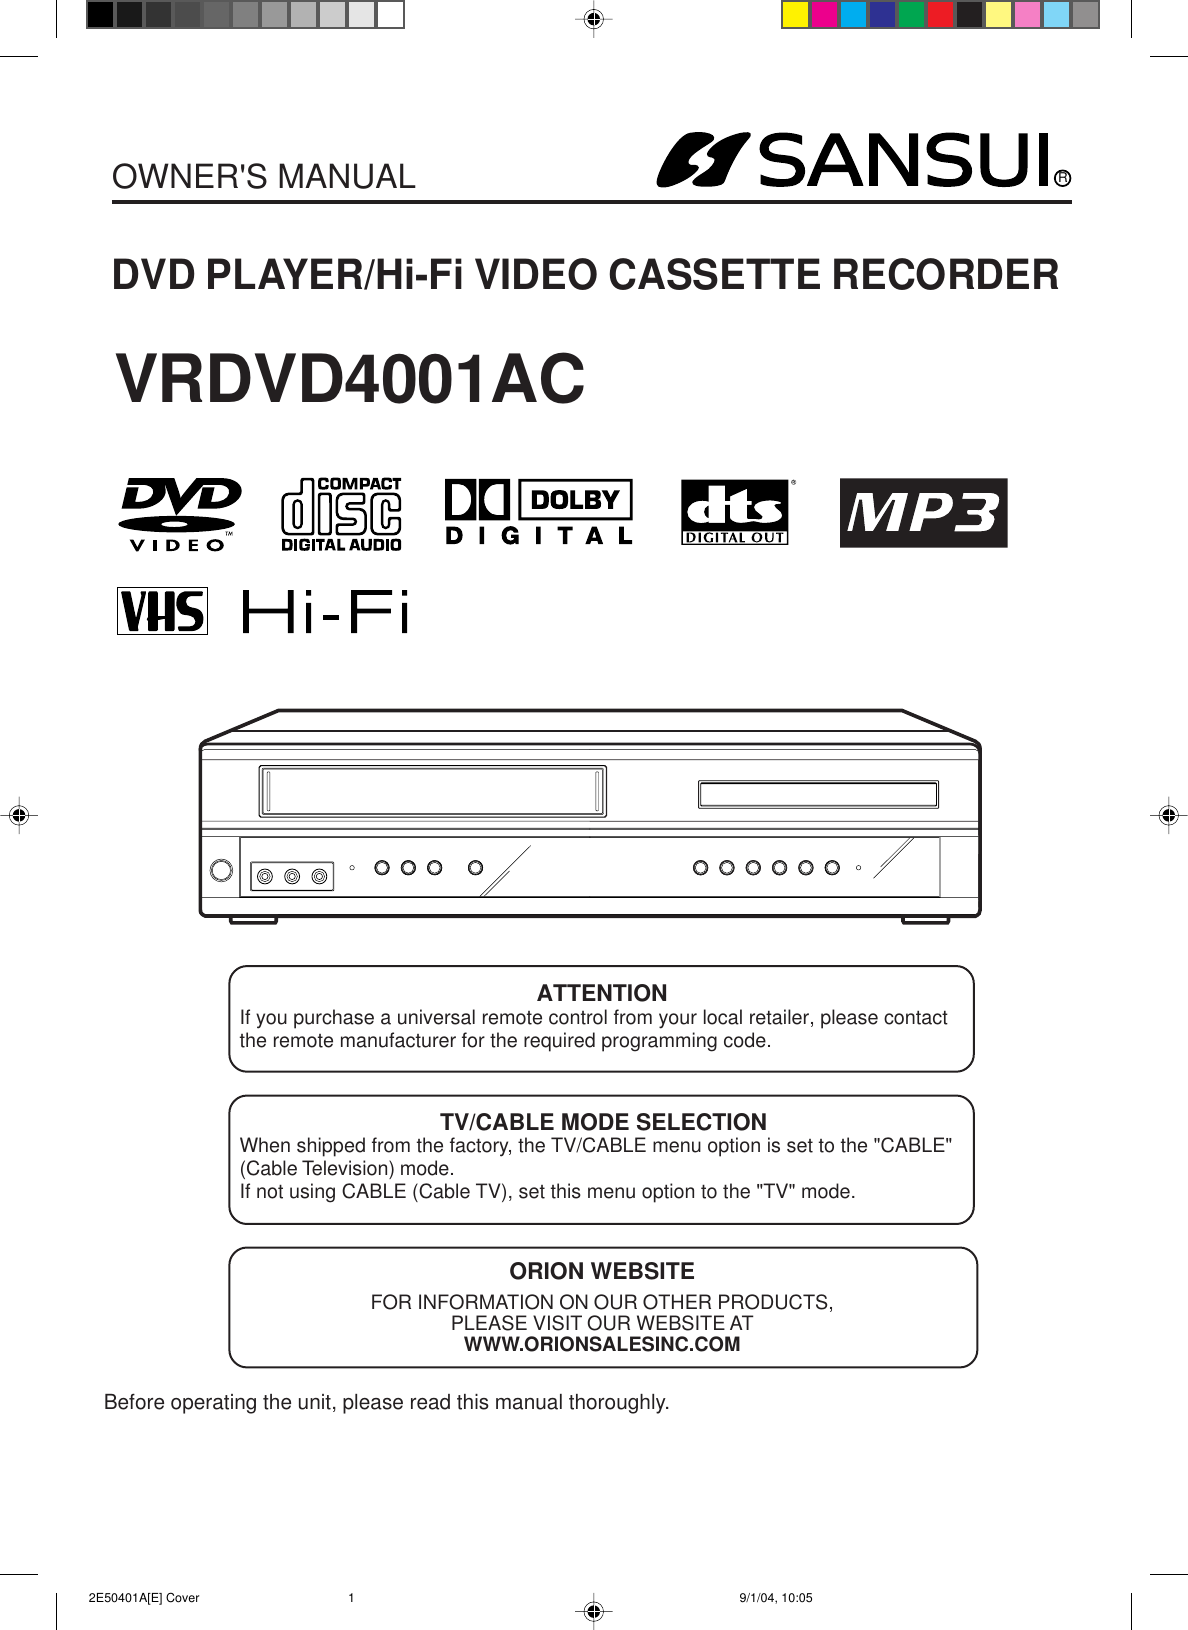 RDVD PLAYER/Hi-Fi VIDEO CASSETTE RECORDEROWNER&apos;S MANUALBefore operating the unit, please read this manual thoroughly.ATTENTIONIf you purchase a universal remote control from your local retailer, please contactthe remote manufacturer for the required programming code.TV/CABLE MODE SELECTIONWhen shipped from the factory, the TV/CABLE menu option is set to the &quot;CABLE&quot;(Cable Television) mode.If not using CABLE (Cable TV), set this menu option to the &quot;TV&quot; mode.ORION WEBSITEFOR INFORMATION ON OUR OTHER PRODUCTS,PLEASE VISIT OUR WEBSITE ATWWW.ORIONSALESINC.COMVRDVD4001AC 2E50401A[E] Cover 9/1/04, 10:051